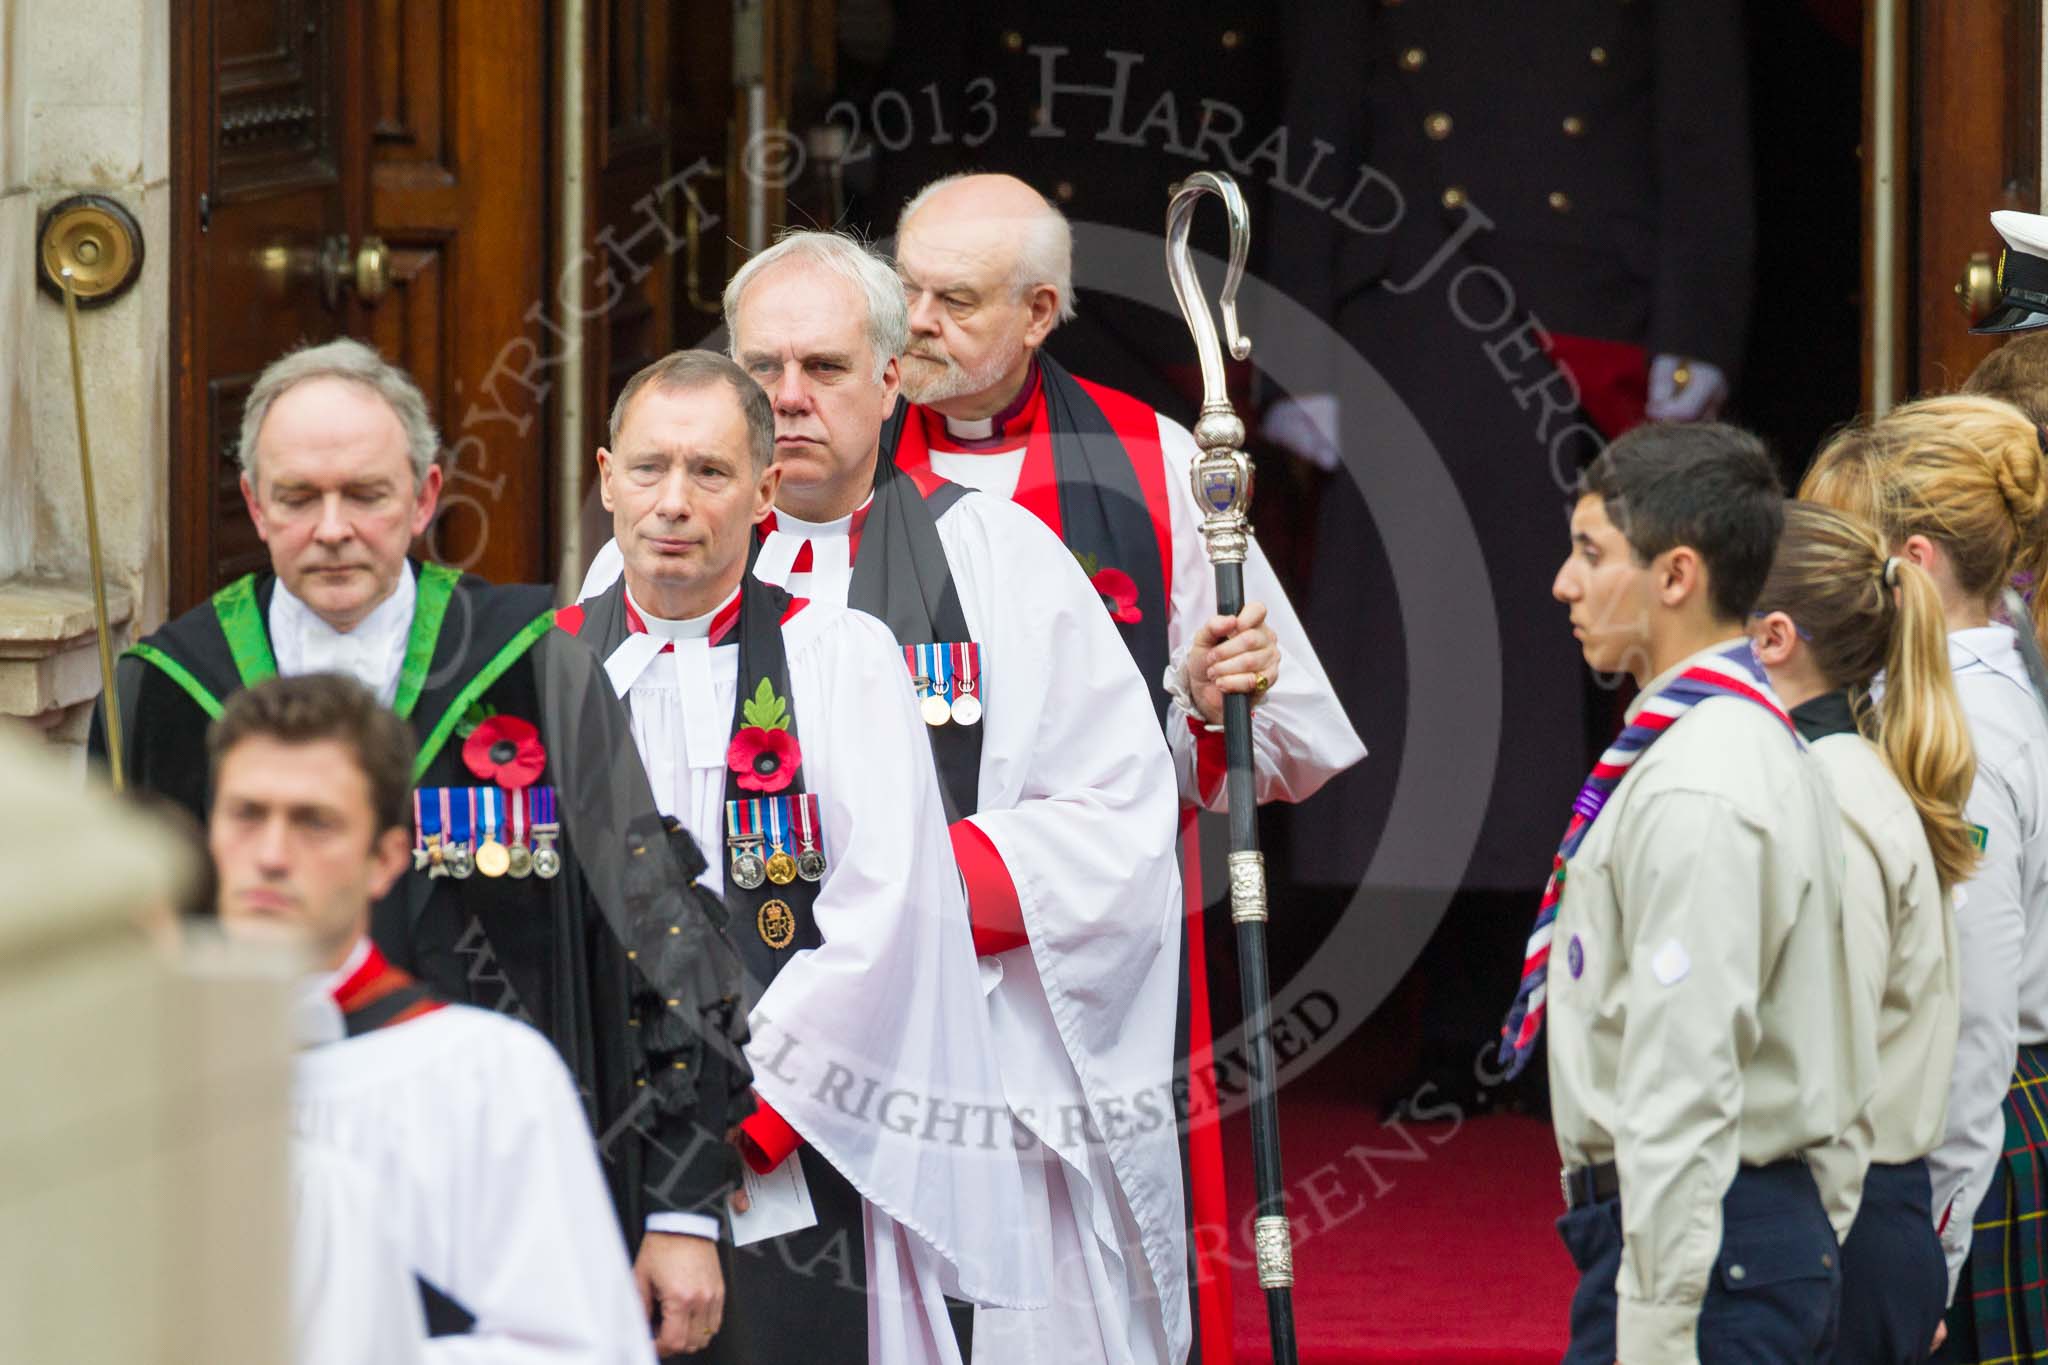 Remembrance Sunday at the Cenotaph 2015: Leaving the Foreign- and Commonwealth Building: The Serjeant of the Vestry; David Baldwin MVO RVM, the Chaplain-in-Chief of the RAF; The Venerable (Air Vice Marshal) Jonathan Chaffey QHC RAF, the Sub-Dean of Her Majesty's Chapels Royal; the Reverend Canon Paul Wright, and the Dean of HM Chapels Royal and the Lord Bishop of London; The Rt Revd. & the Rt Hon Dr Richard Chartres. Image #77, 08 November 2015 10:54 Whitehall, London, UK